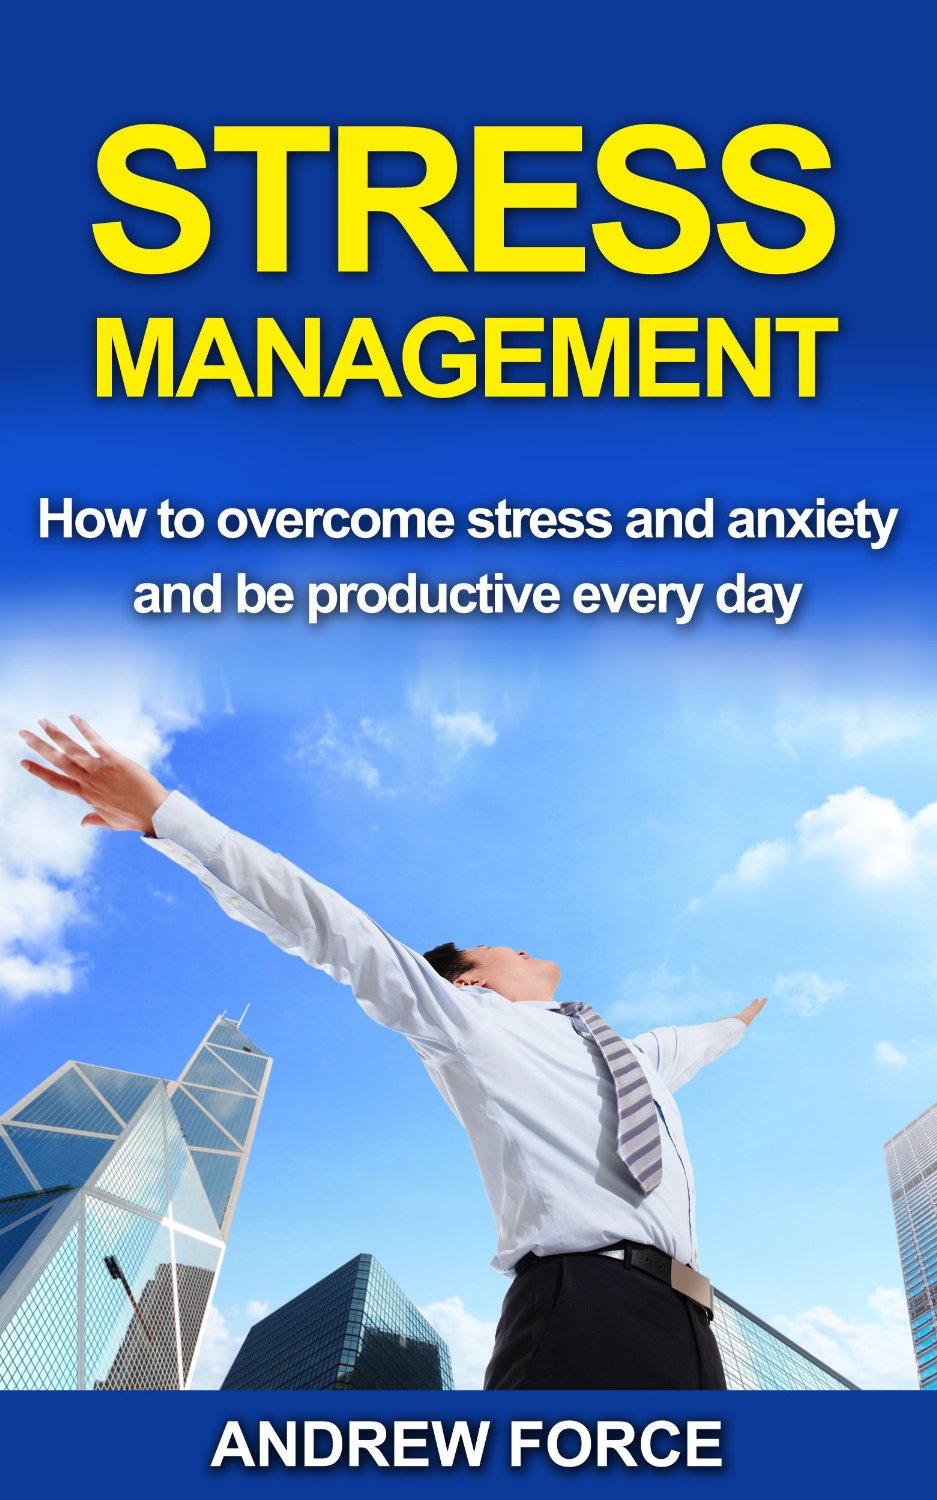 Stress management: How to overcome stress and anxiety and be productive everyday by Andrew Force